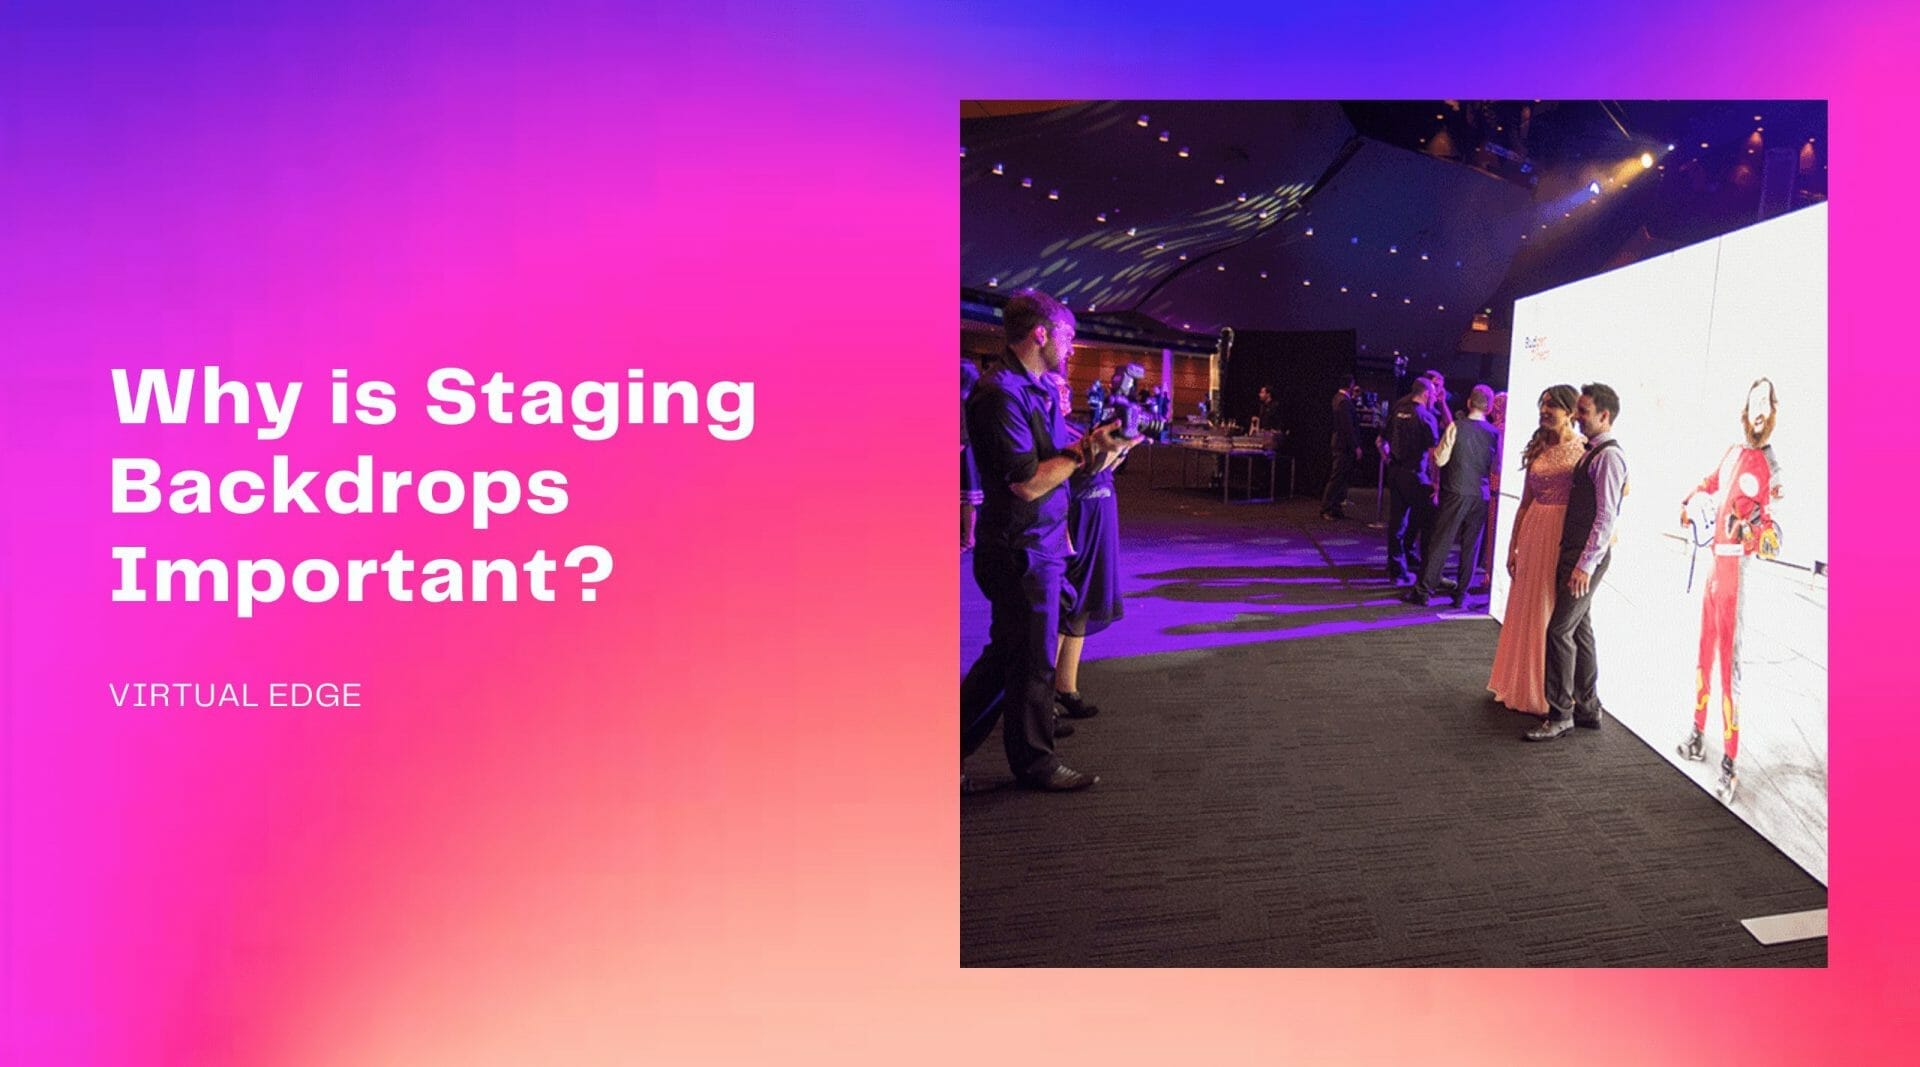 Why is Staging Backdrops Important?